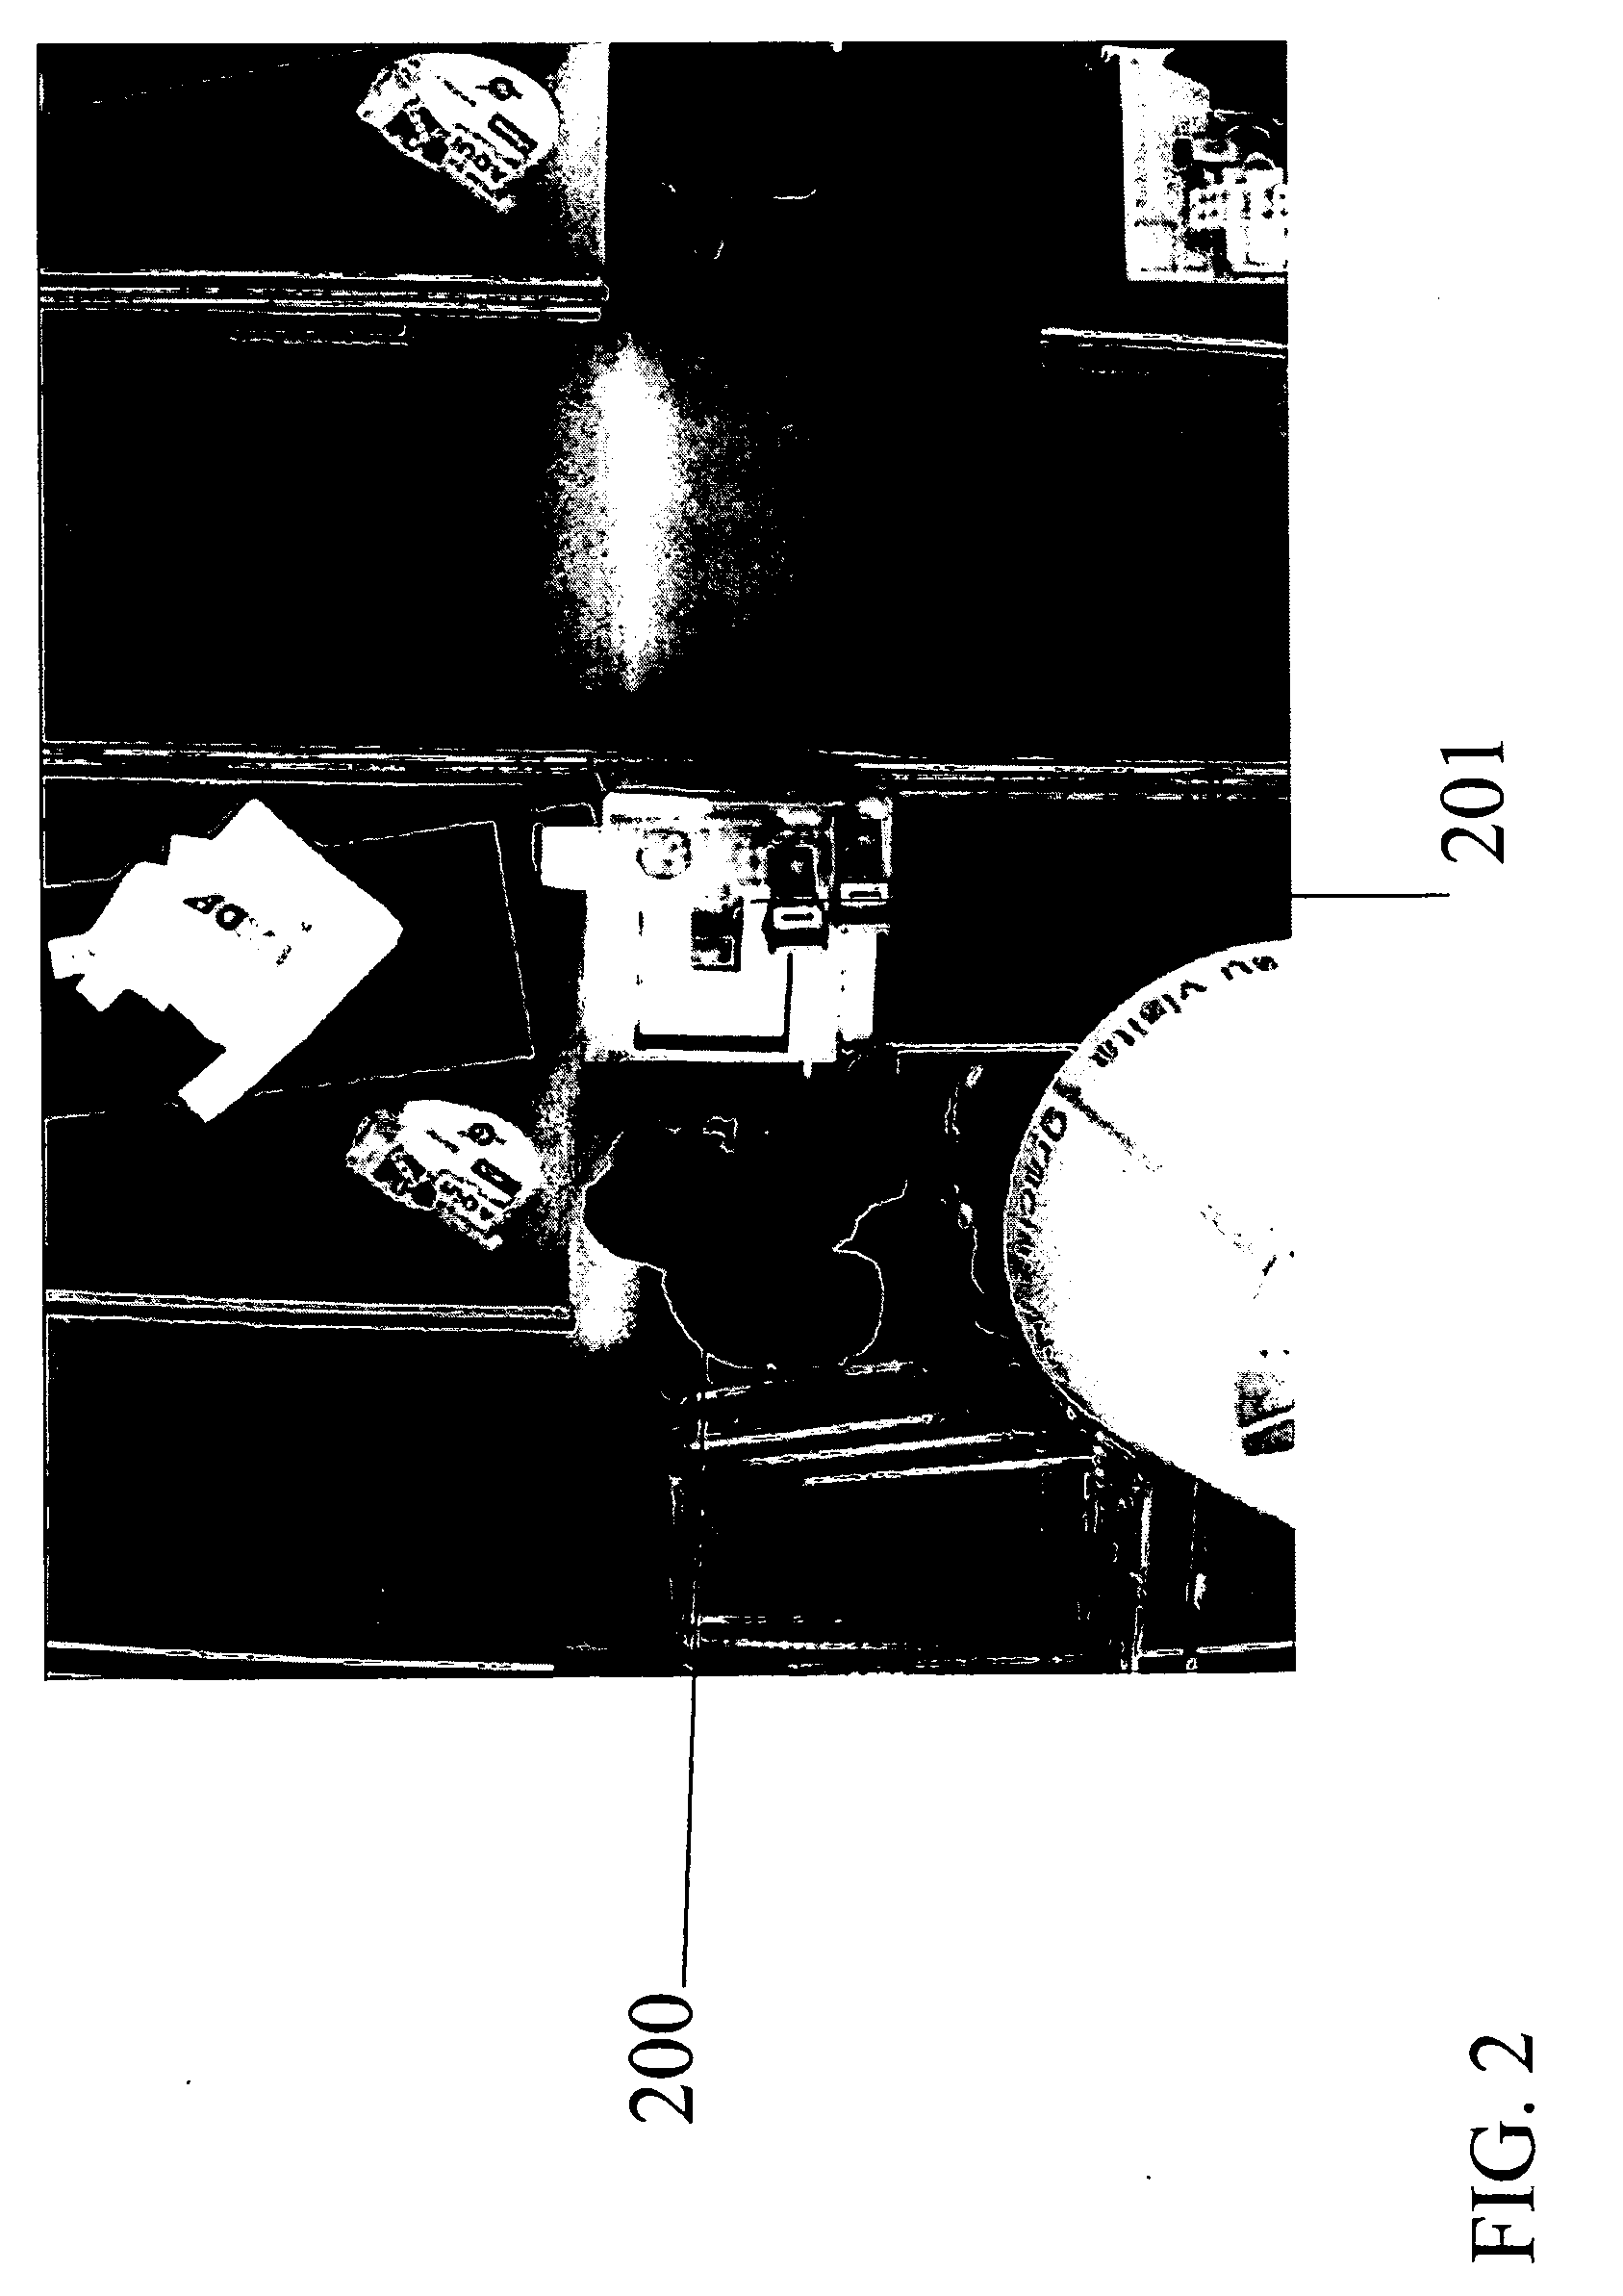 System and method for using transaction statistics to facilitate checkout variance investigation